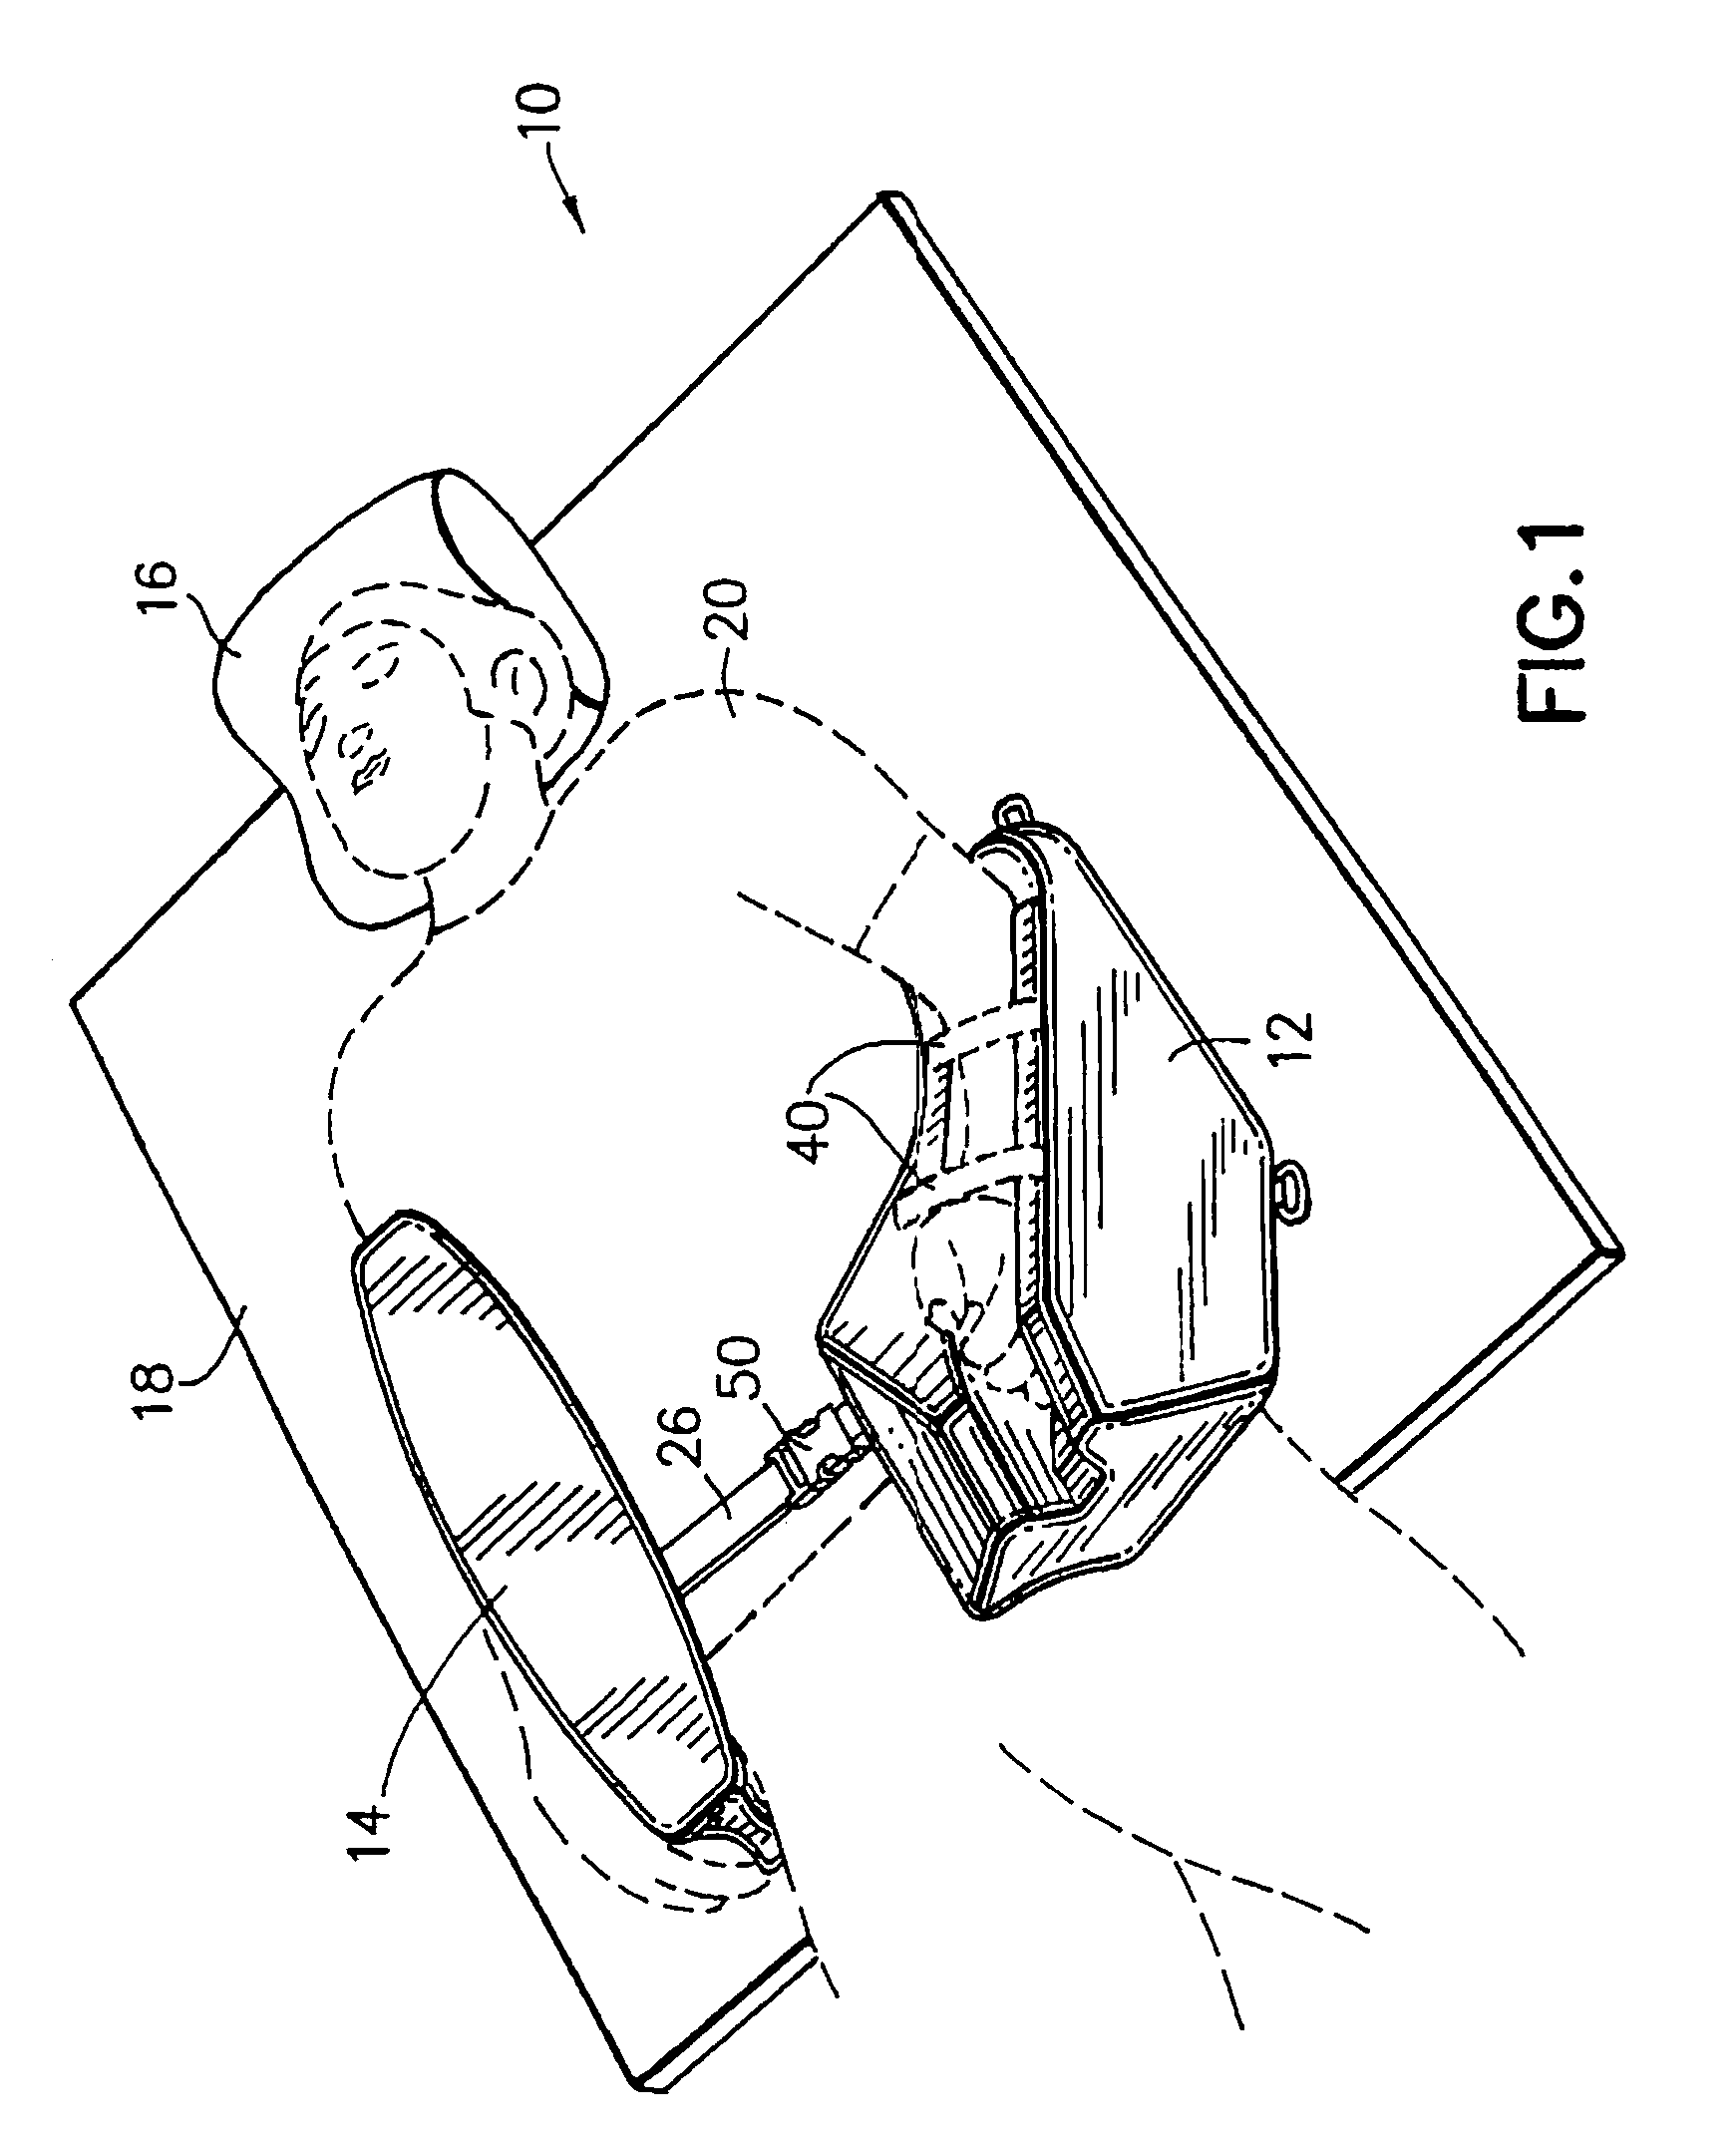 Convertible support system, device, and method for shoulder surgery patients